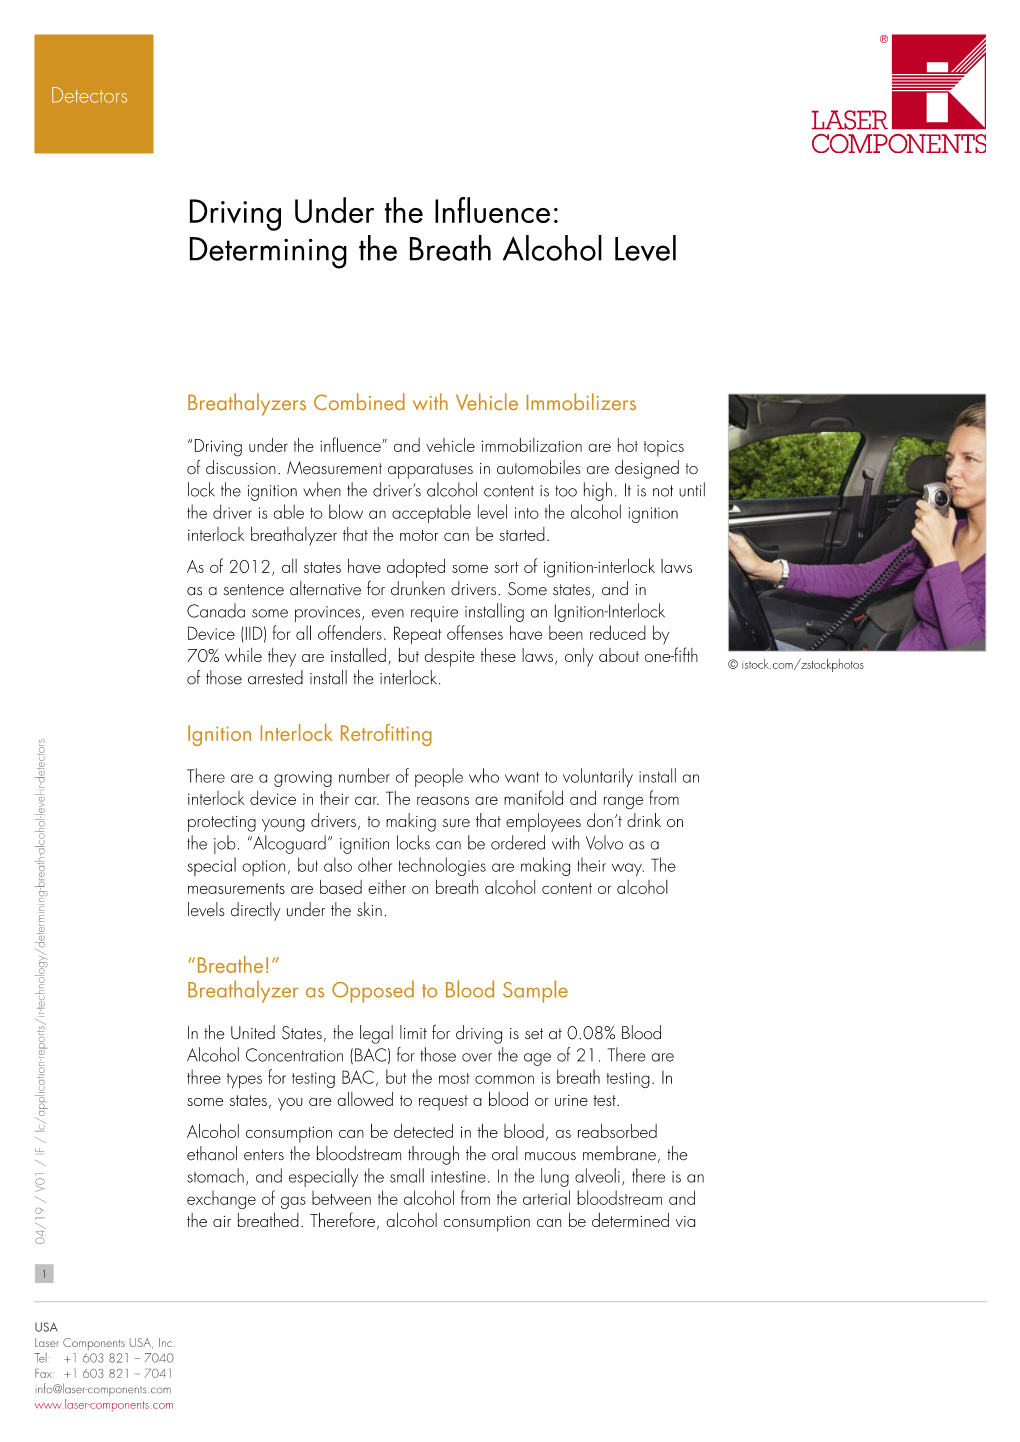 Determining the Breath Alcohol Level with IR Detectors